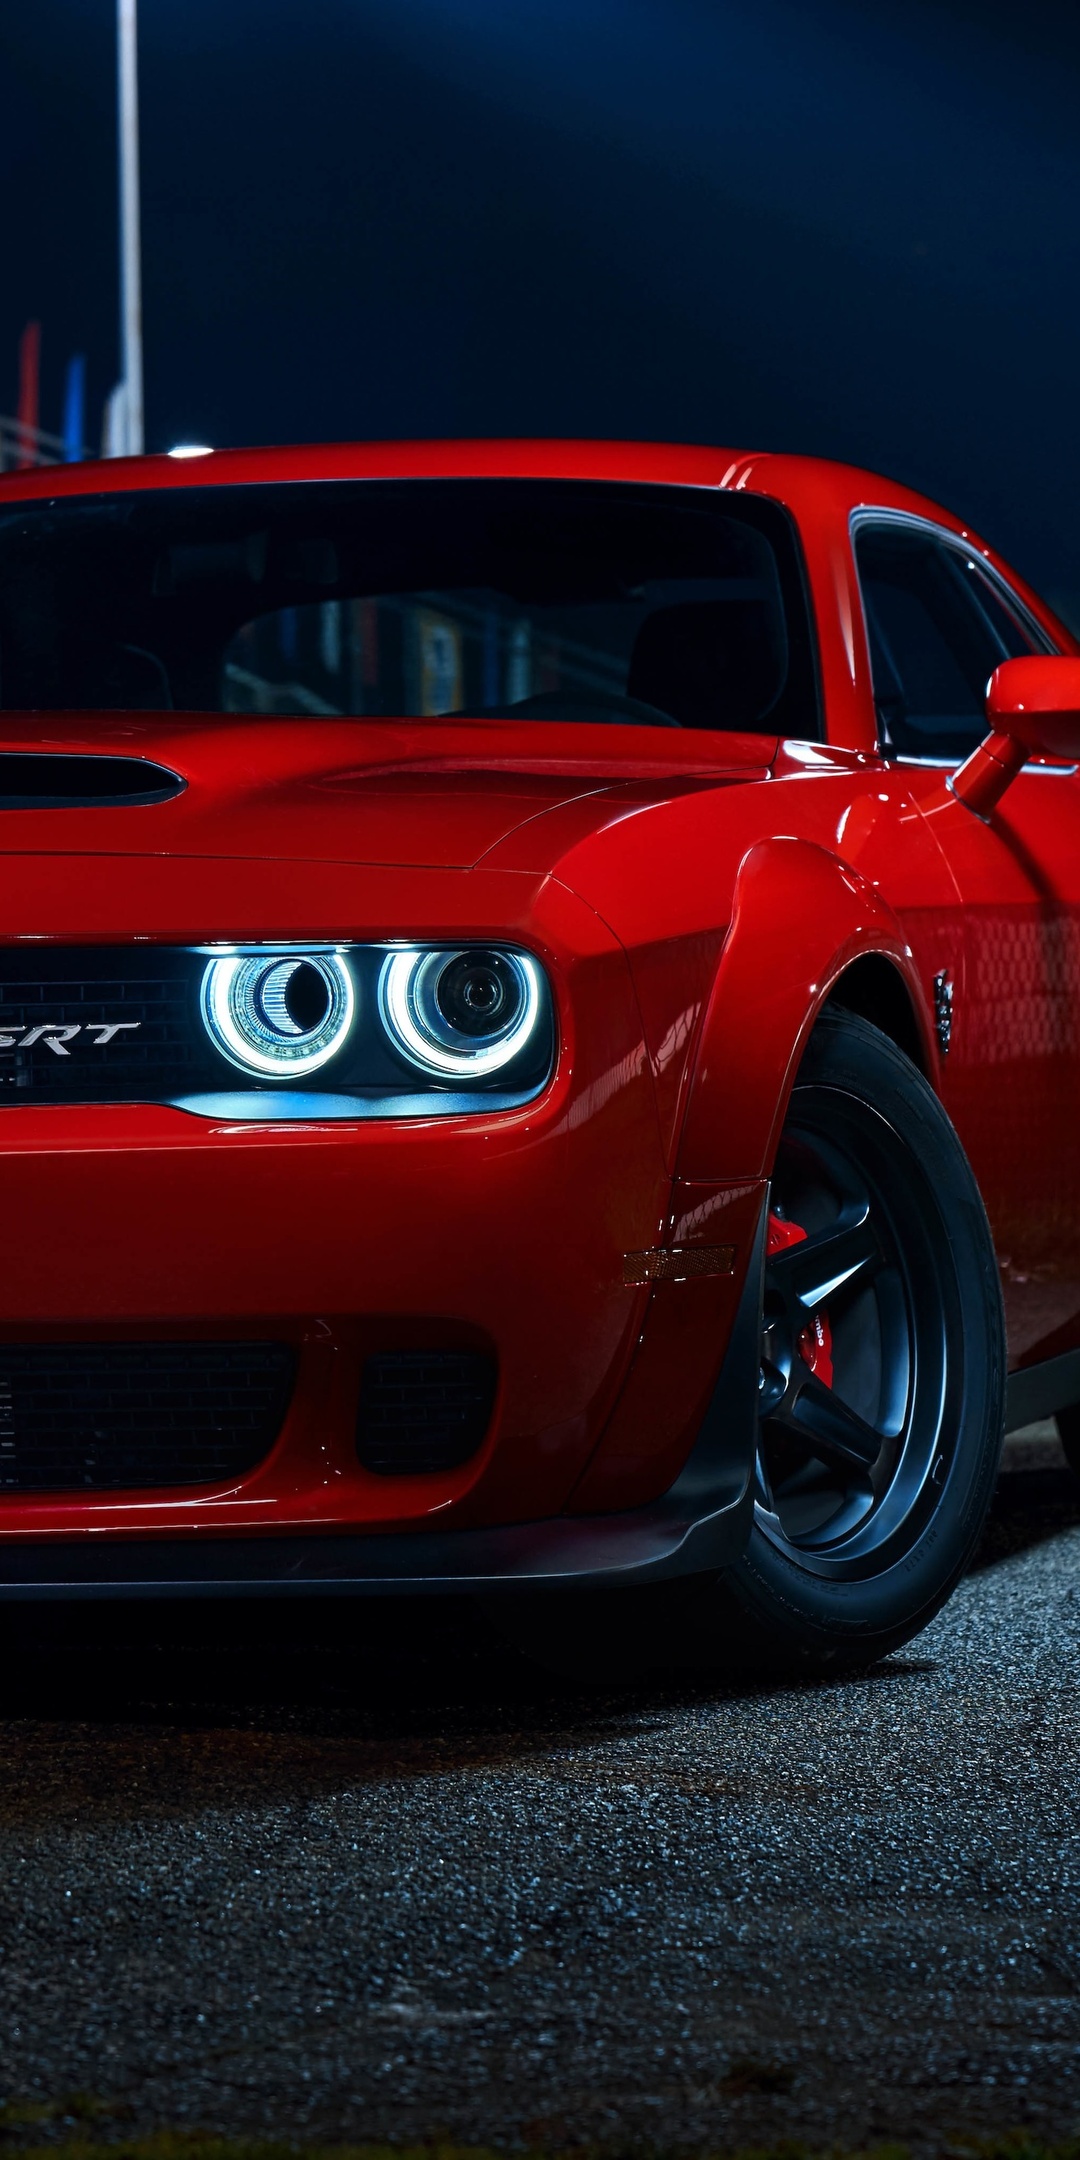 Dodge Challenger SRT Demon 5k One Plus 5T, Honor 7x, Honor view Lg Q6 HD 4k Wallpaper, Image, Background, Photo and Picture